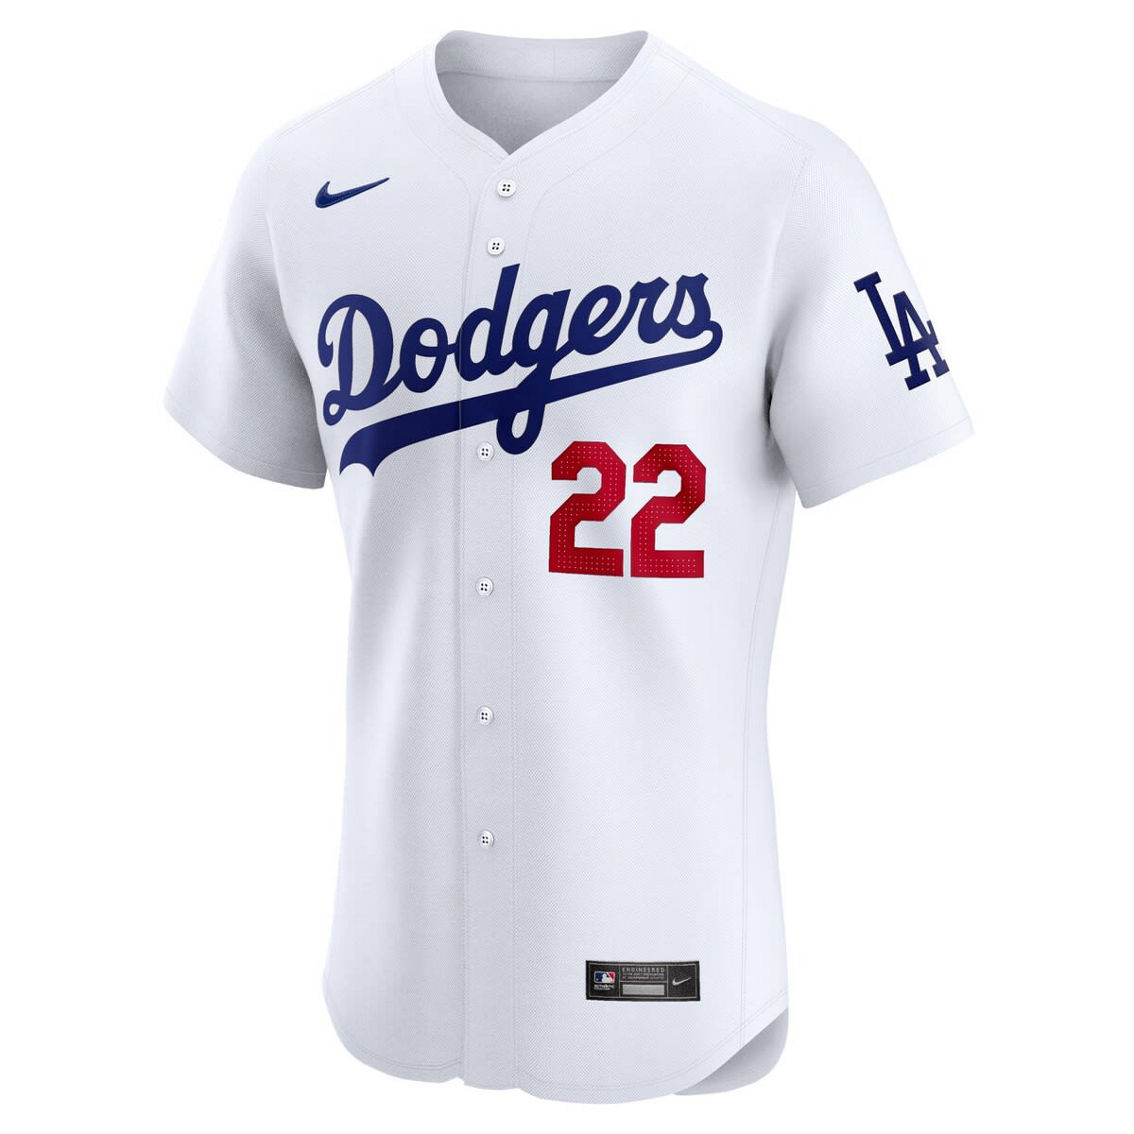 Nike Men's Clayton Kershaw White Los Angeles Dodgers Home Elite Player Jersey - Image 3 of 4